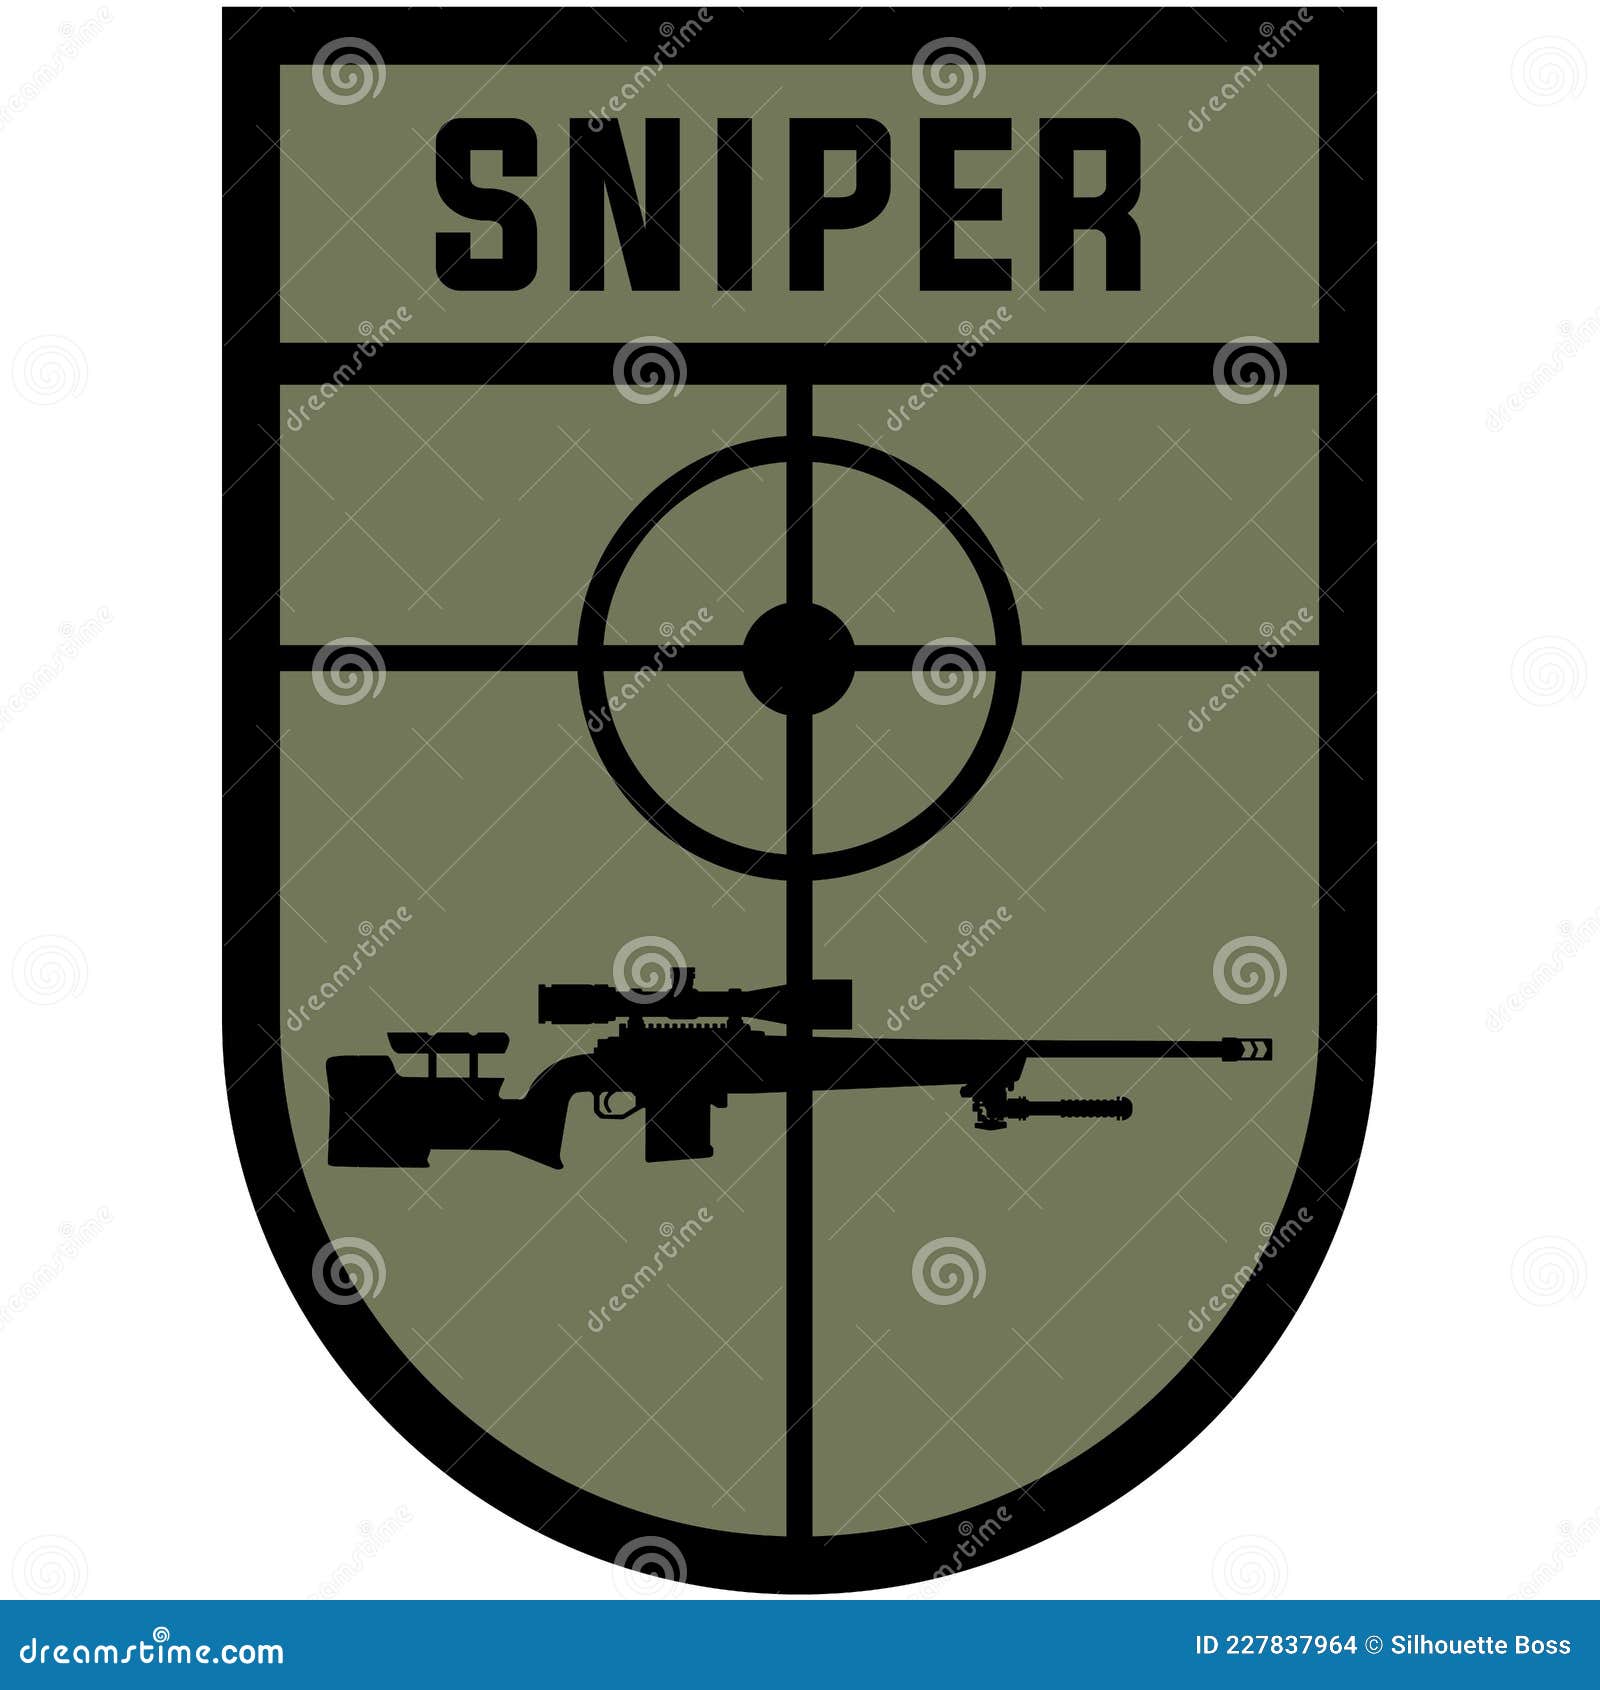 us army navy seal sniper and us marines, military of germany and armed forces of germany sniper badge, patch with sniper rifle.